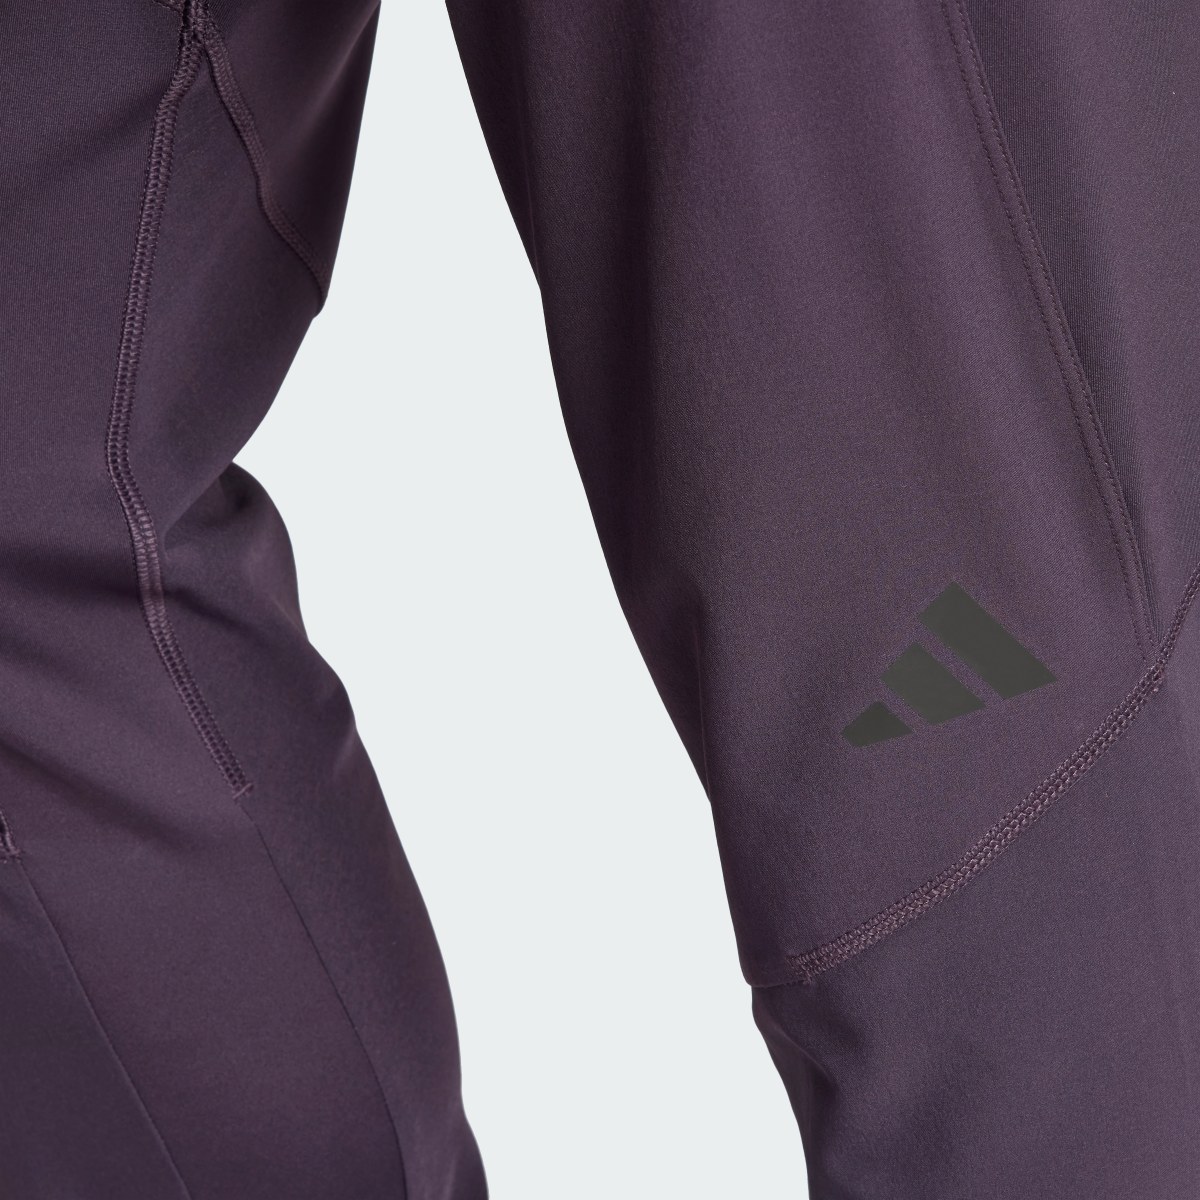 Adidas Designed for Training Workout Pants. 6